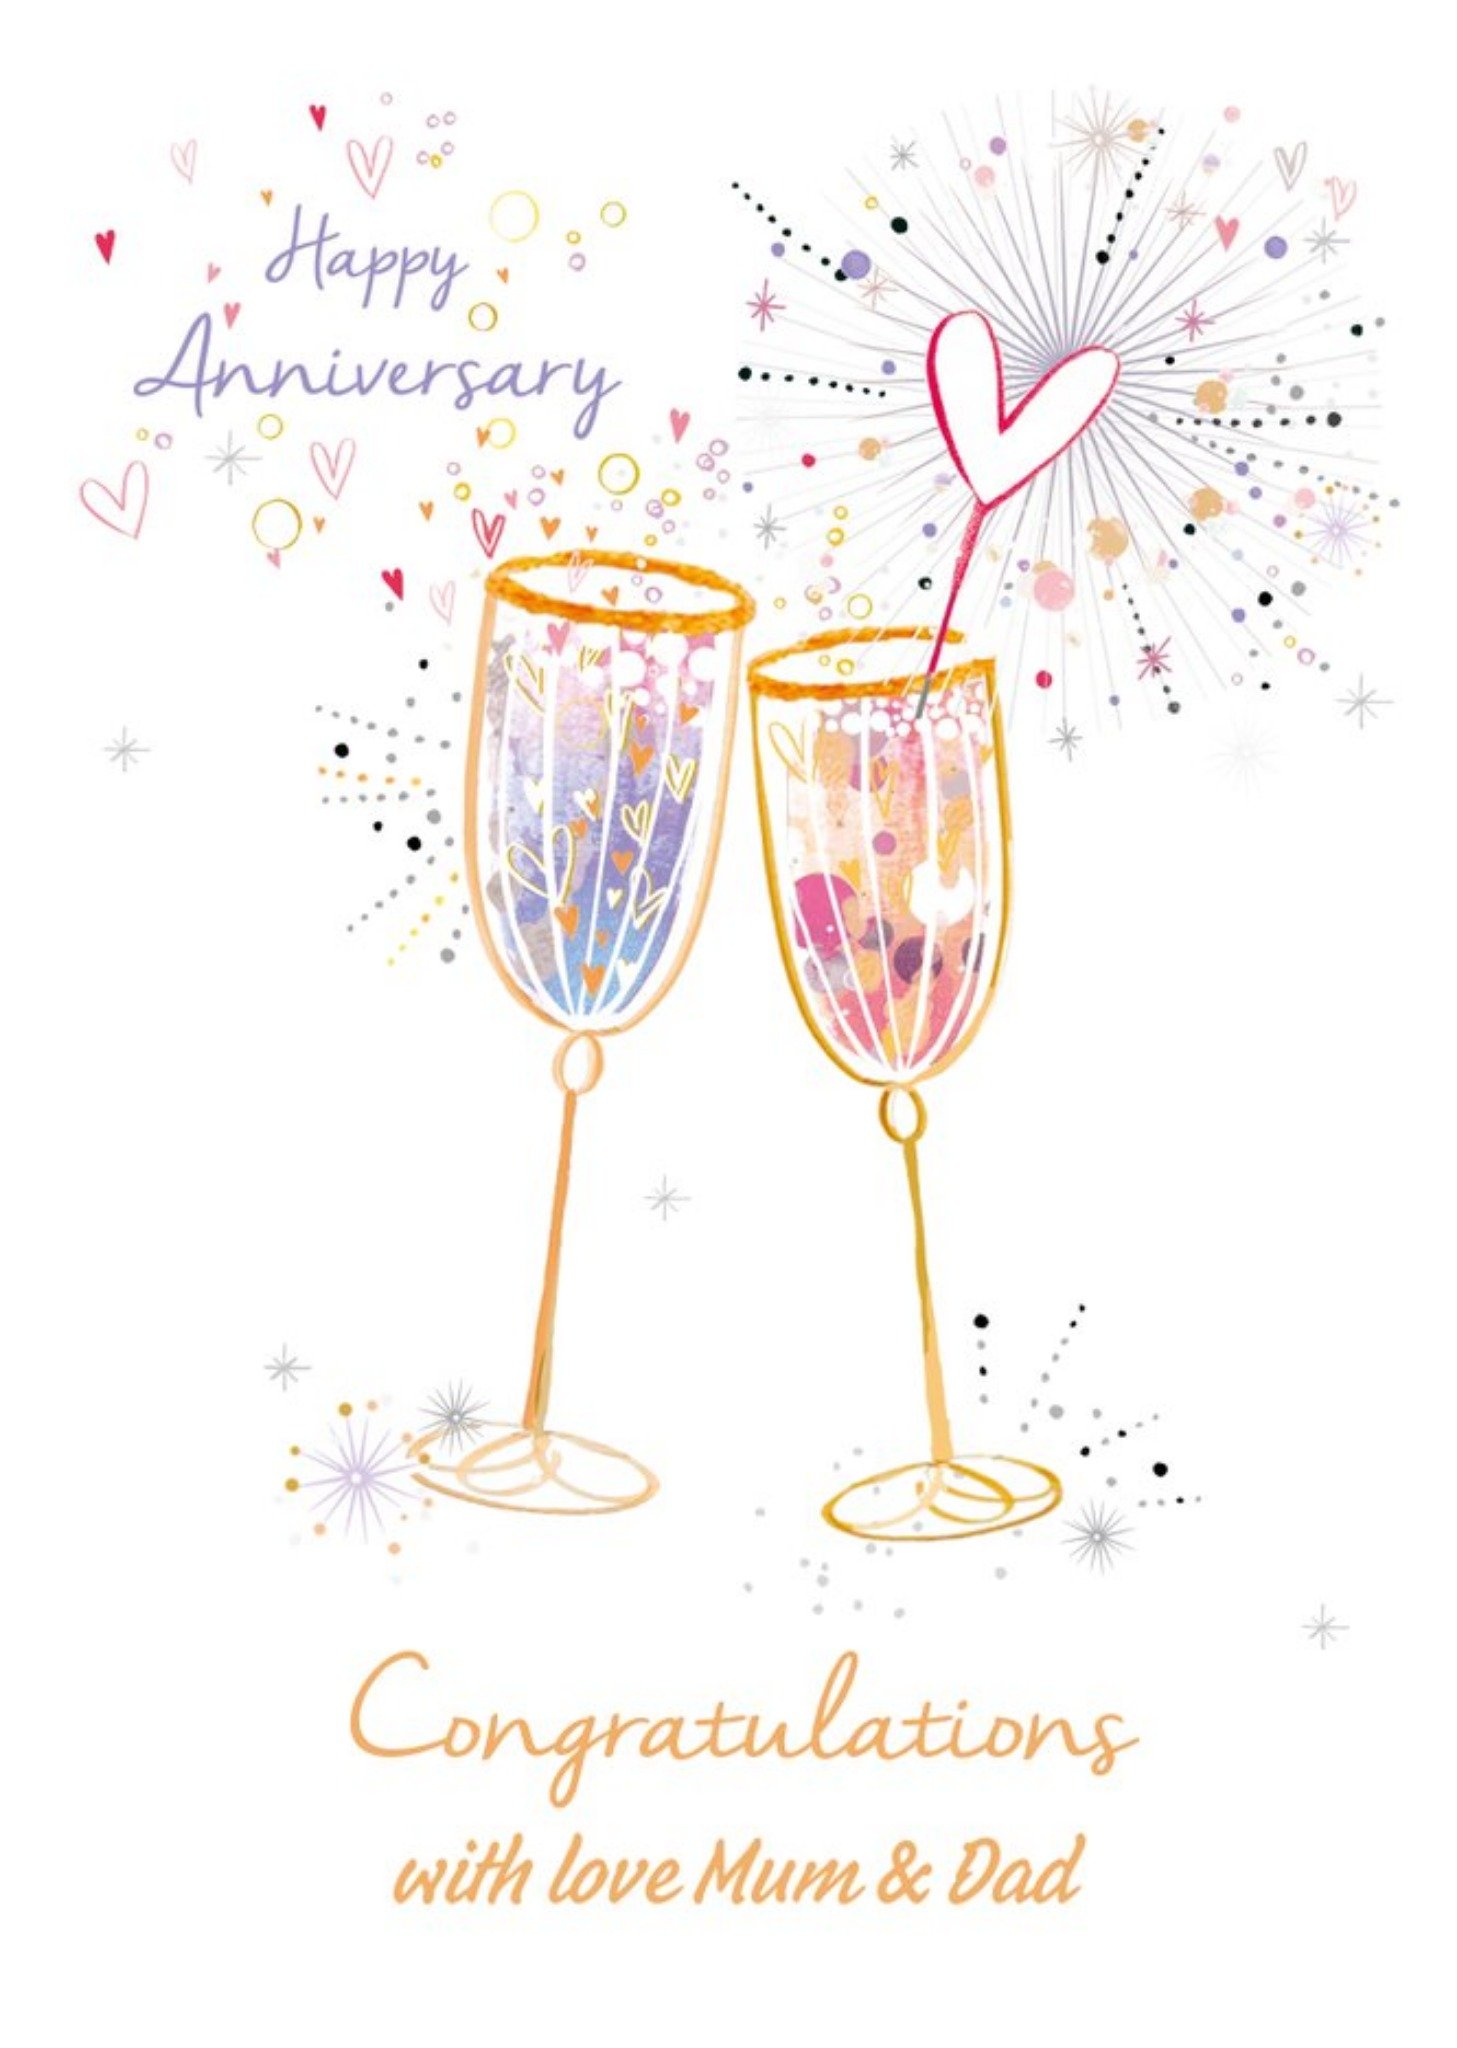 Moonpig Happy Anniversary Congratulations Champagne Glasses Sparkle Design Card From Mum And Dad, La